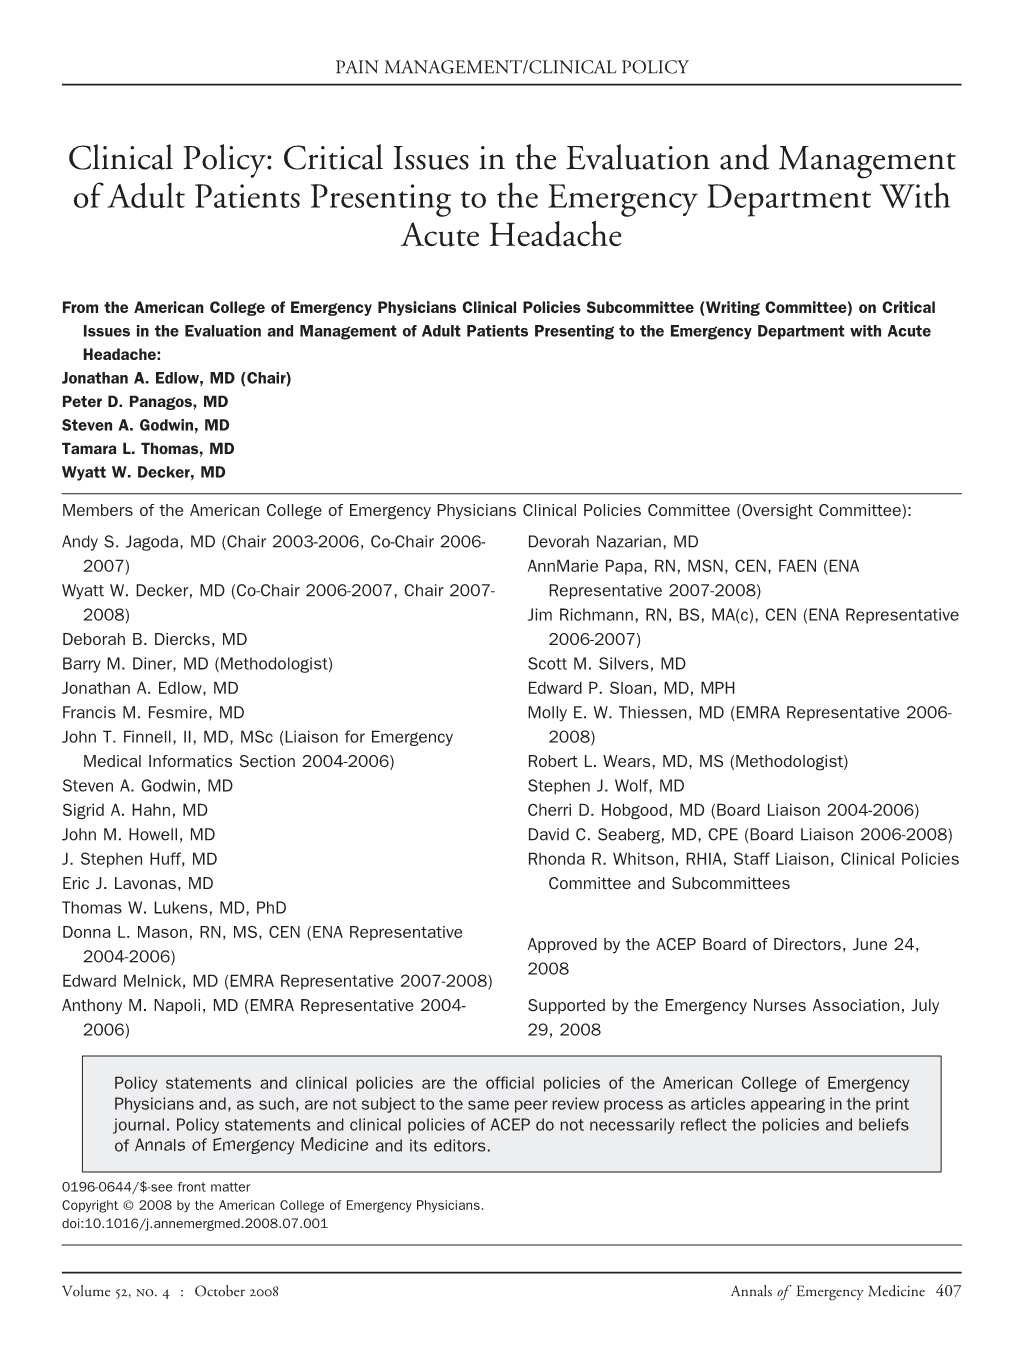 Clinical Policy: Critical Issues in the Evaluation and Management of Adult Patients Presenting to the Emergency Department with Acute Headache